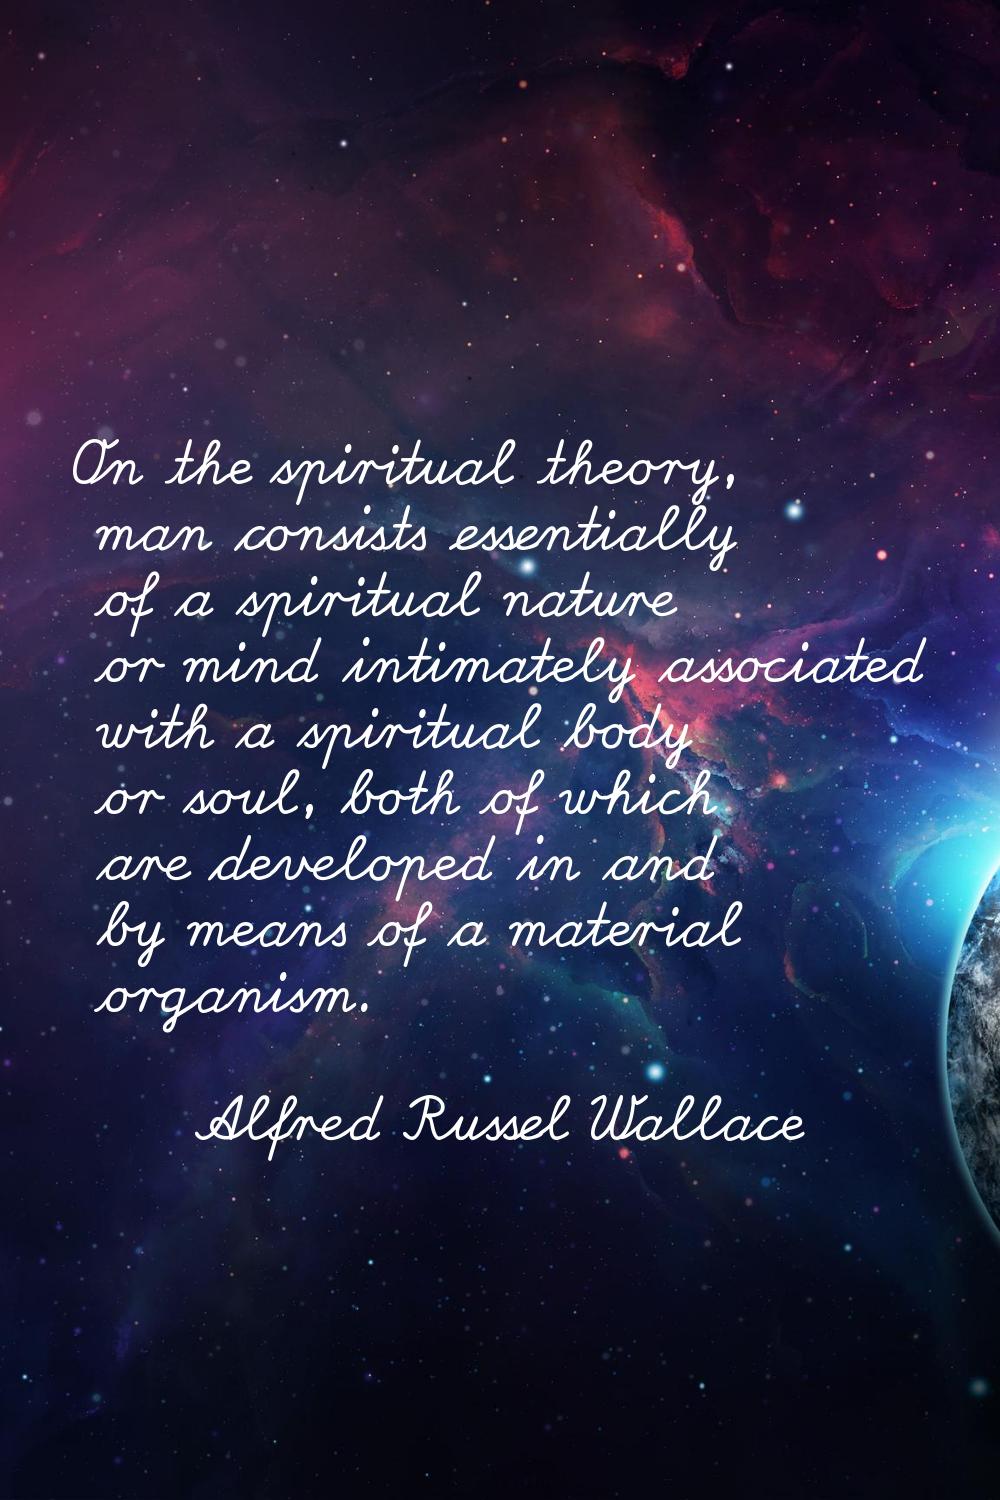 On the spiritual theory, man consists essentially of a spiritual nature or mind intimately associat